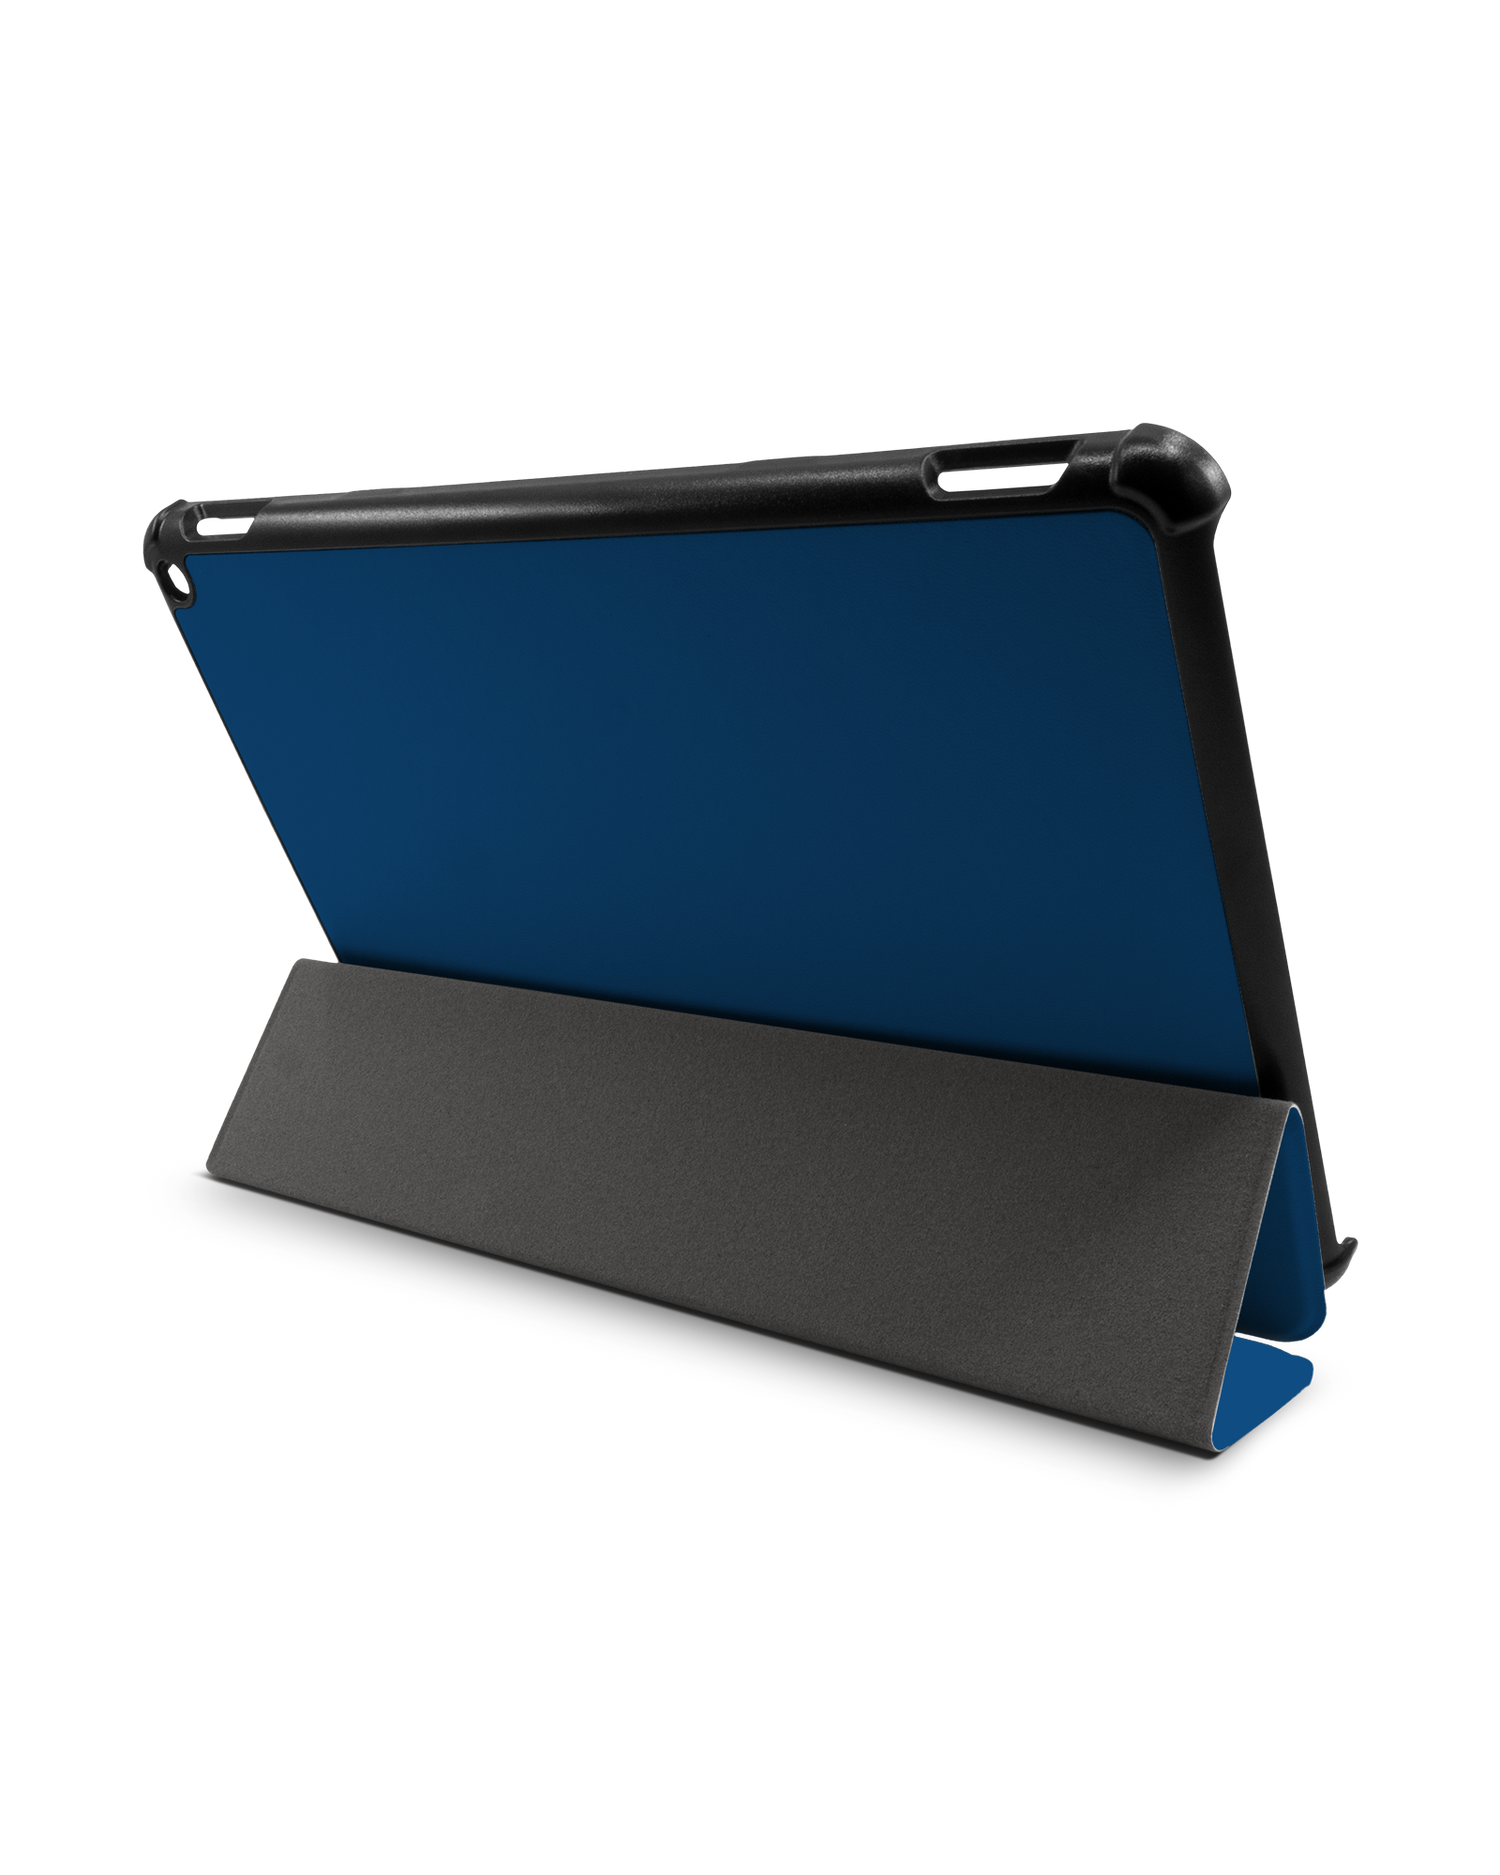 CLASSIC BLUE Tablet Smart Case for Amazon Fire HD 10 (2021): Used as Stand